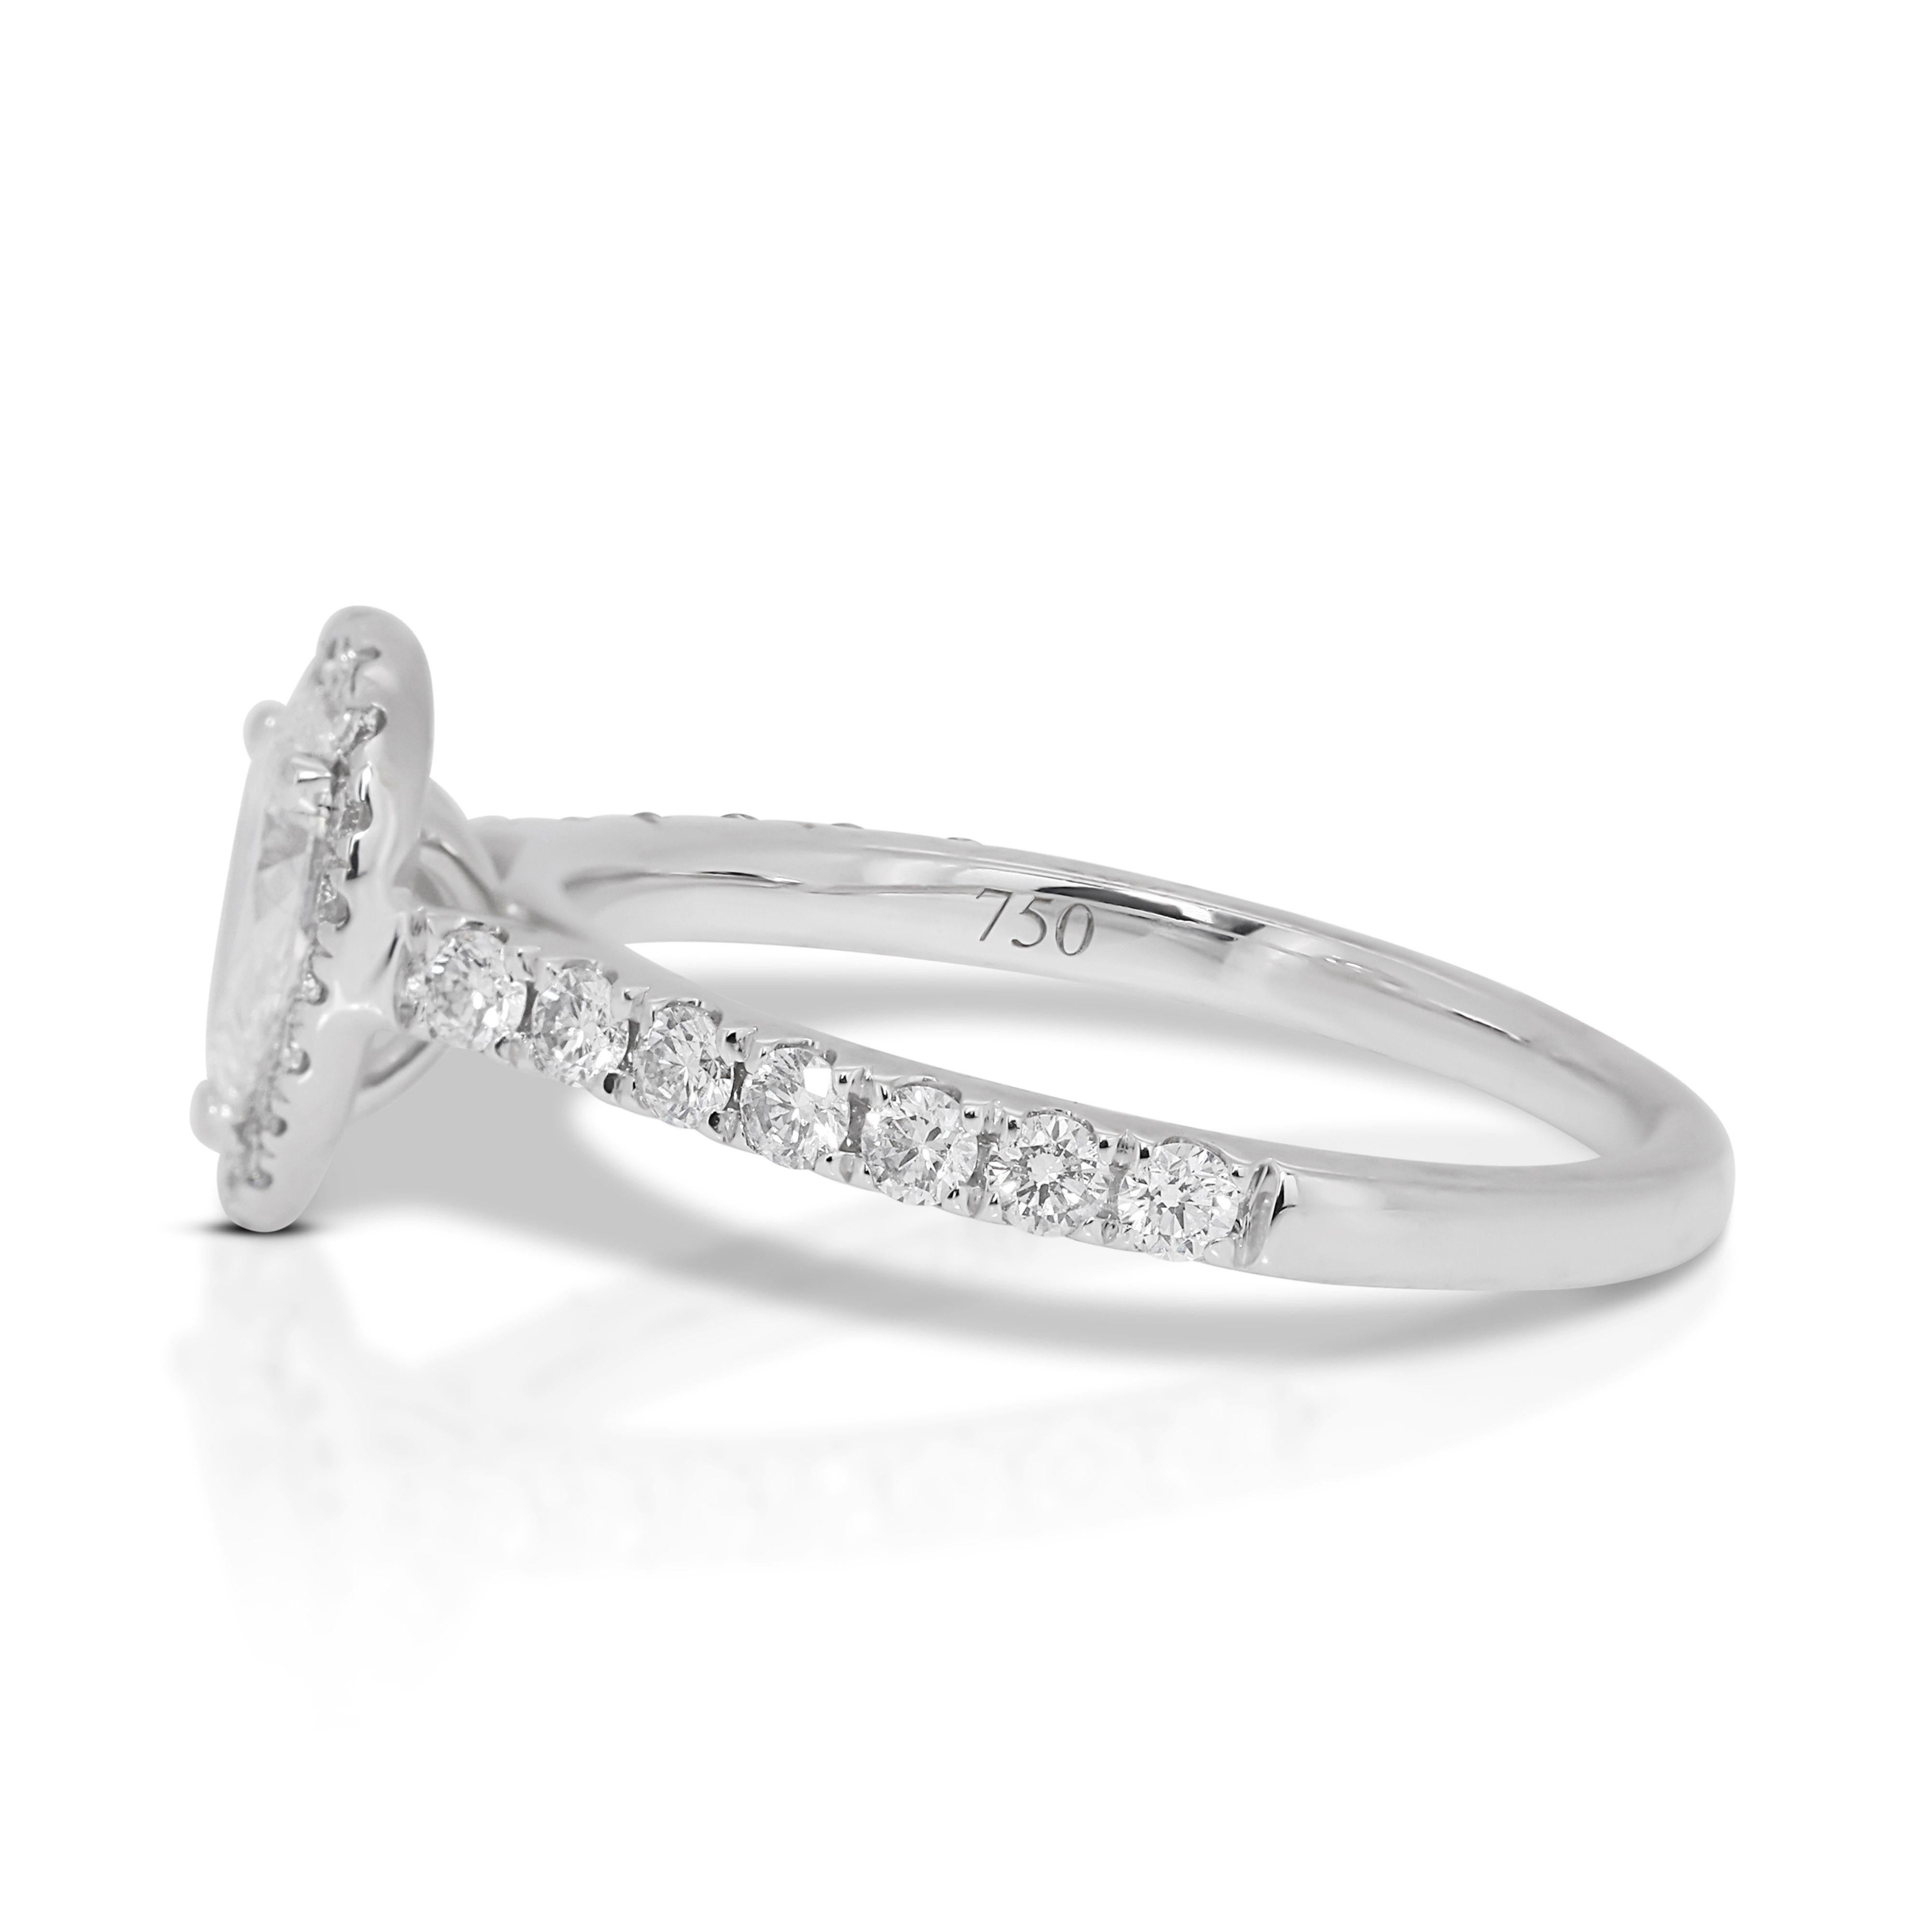 Women's Elegant 18k White Gold with 0.71ct Pear-shaped Diamond Ring For Sale